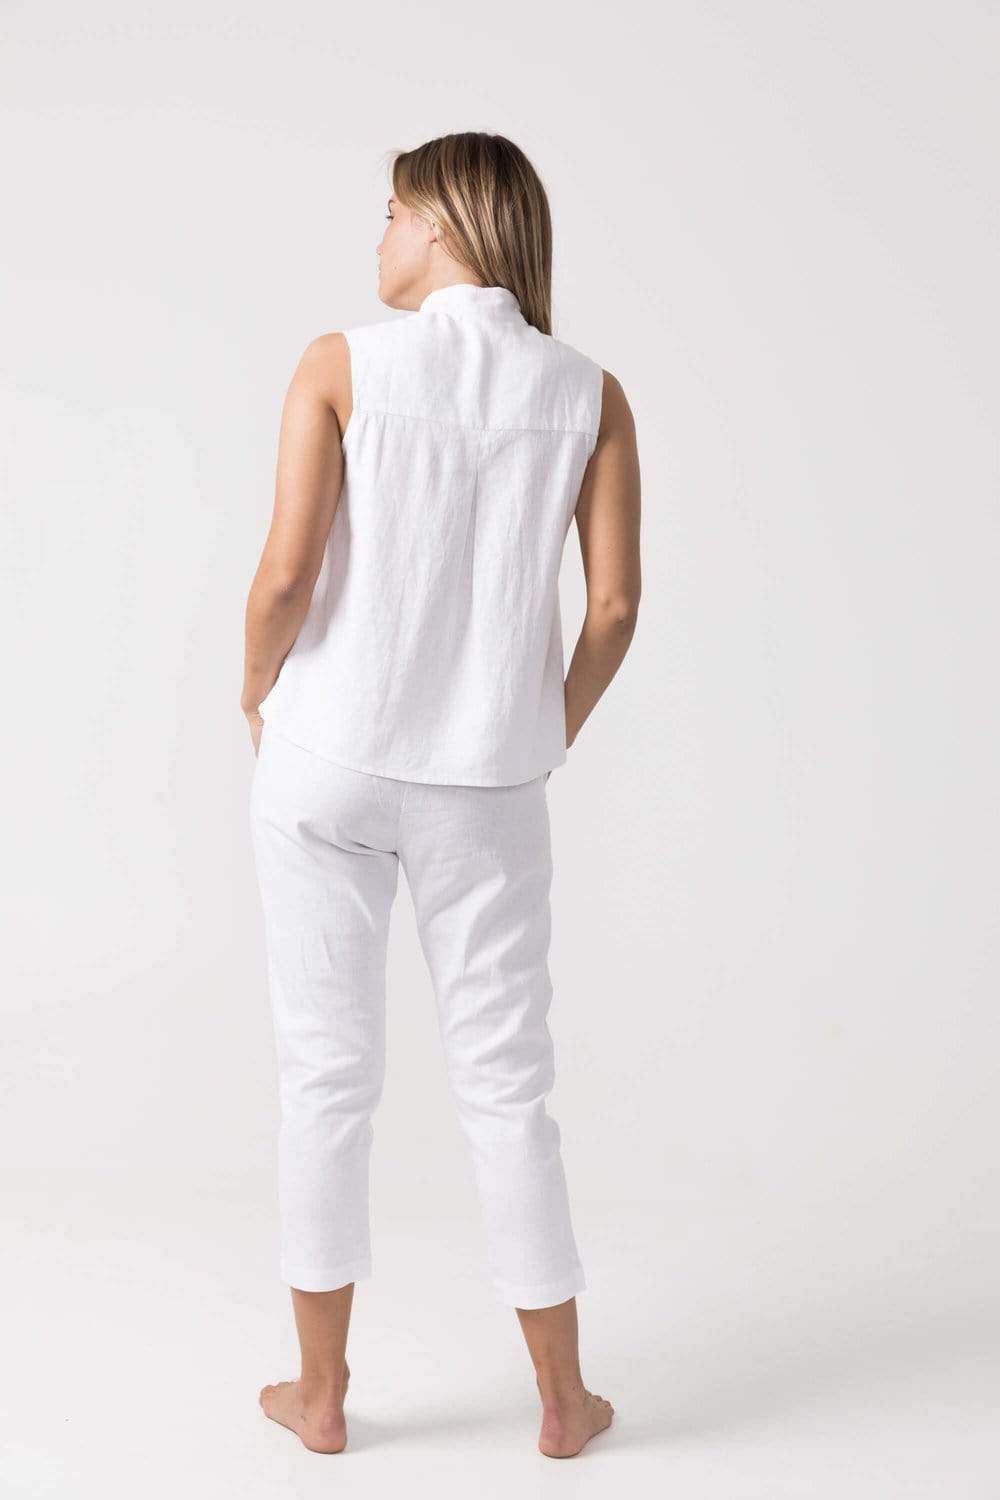 The Wilma Pants - White-Findlay-stride